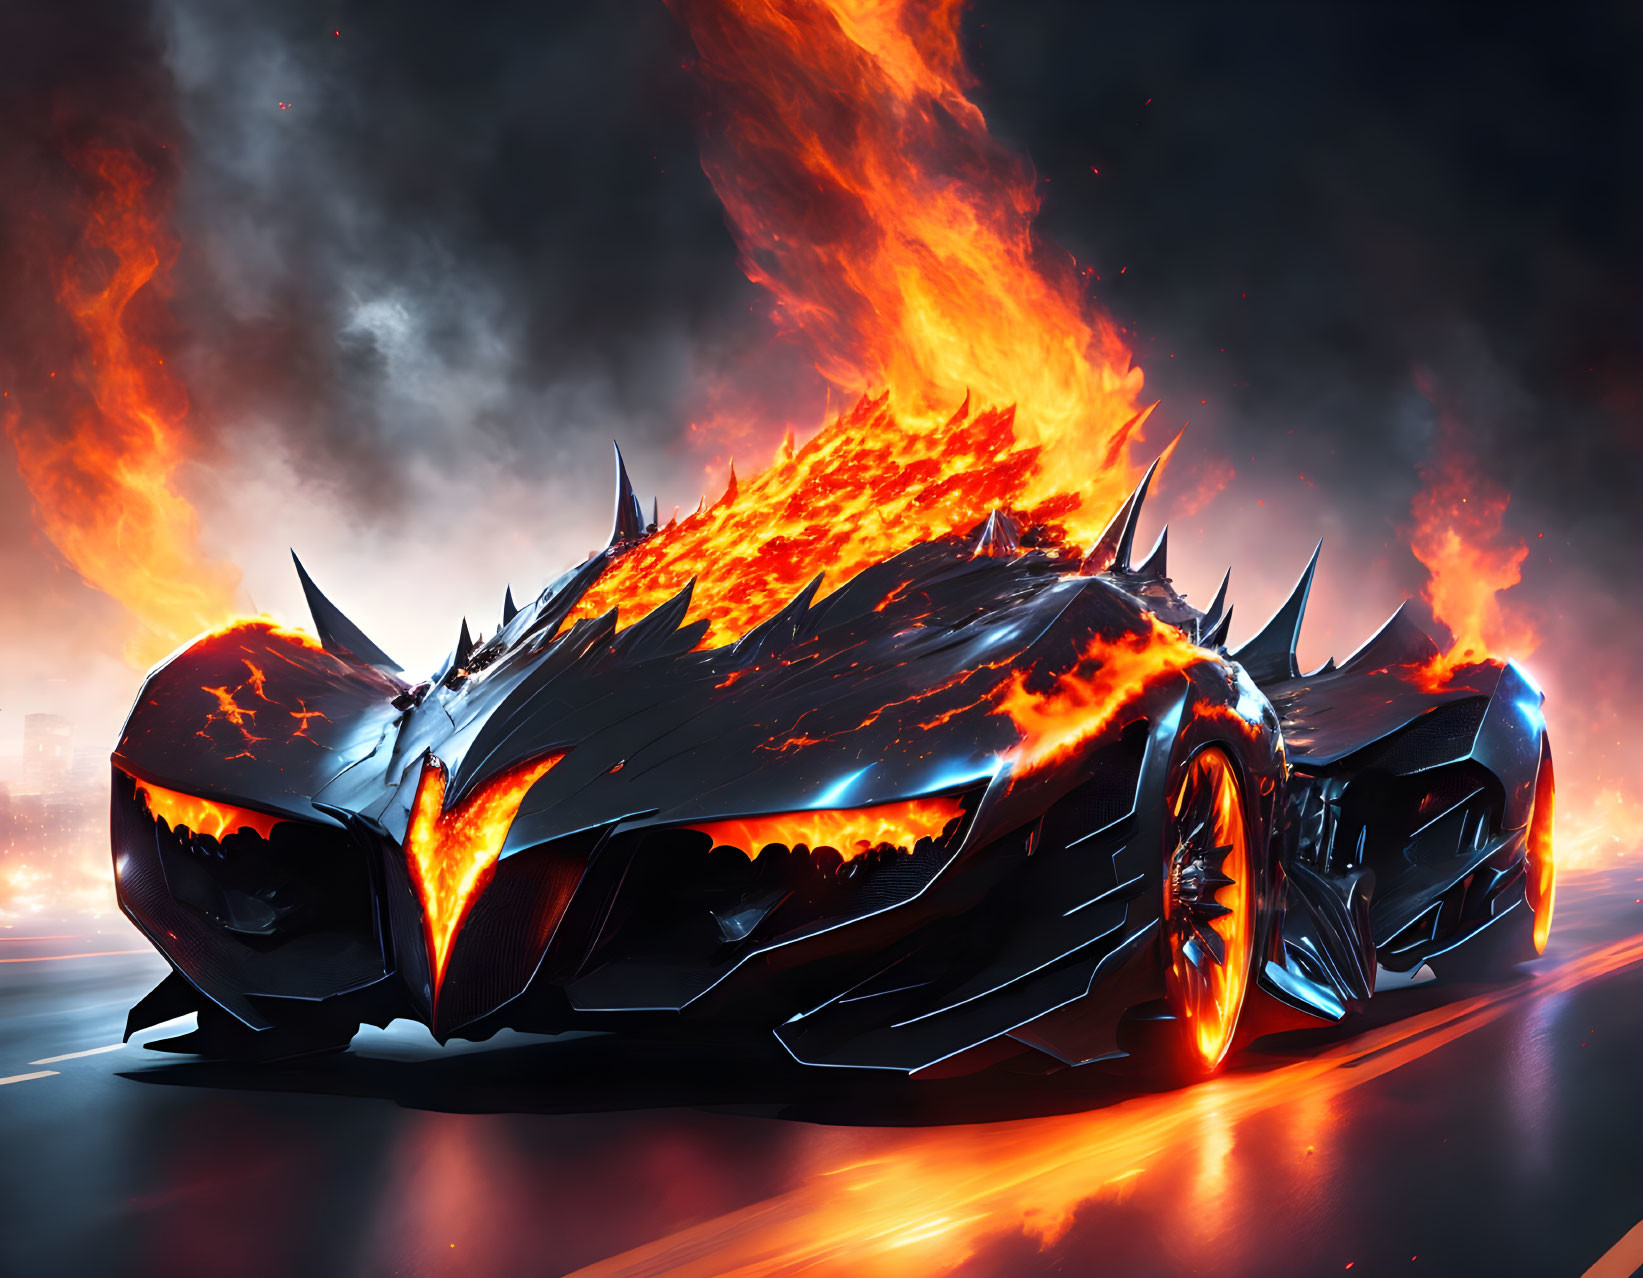 ghost rider car on fire